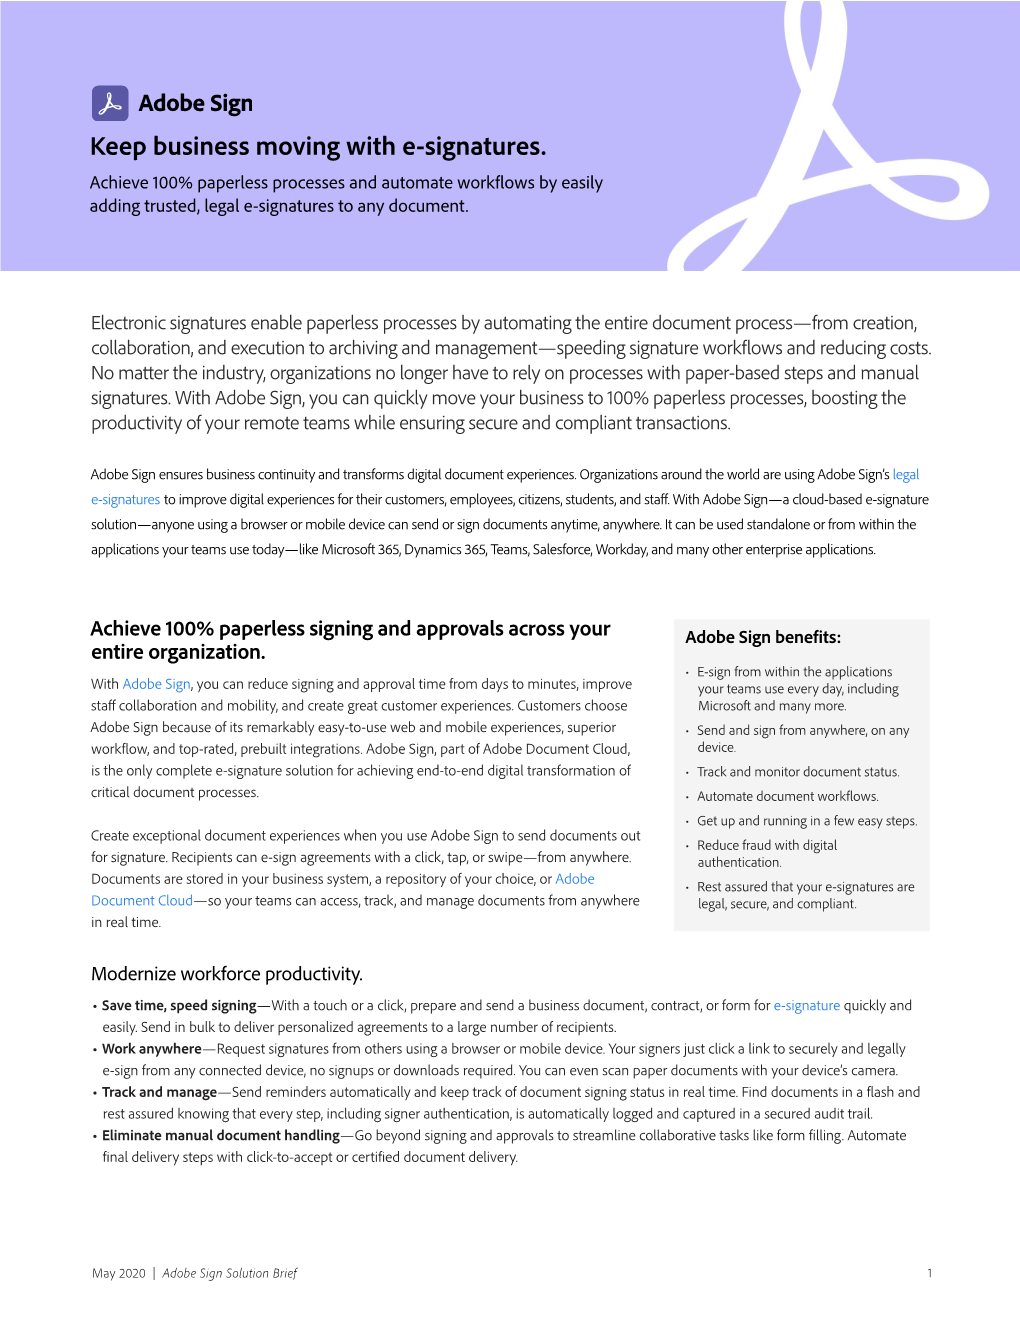 Adobe Sign Solution Brief 1 E-Signature Use Cases: Completely Paperless Processes for Every Business Or Industry